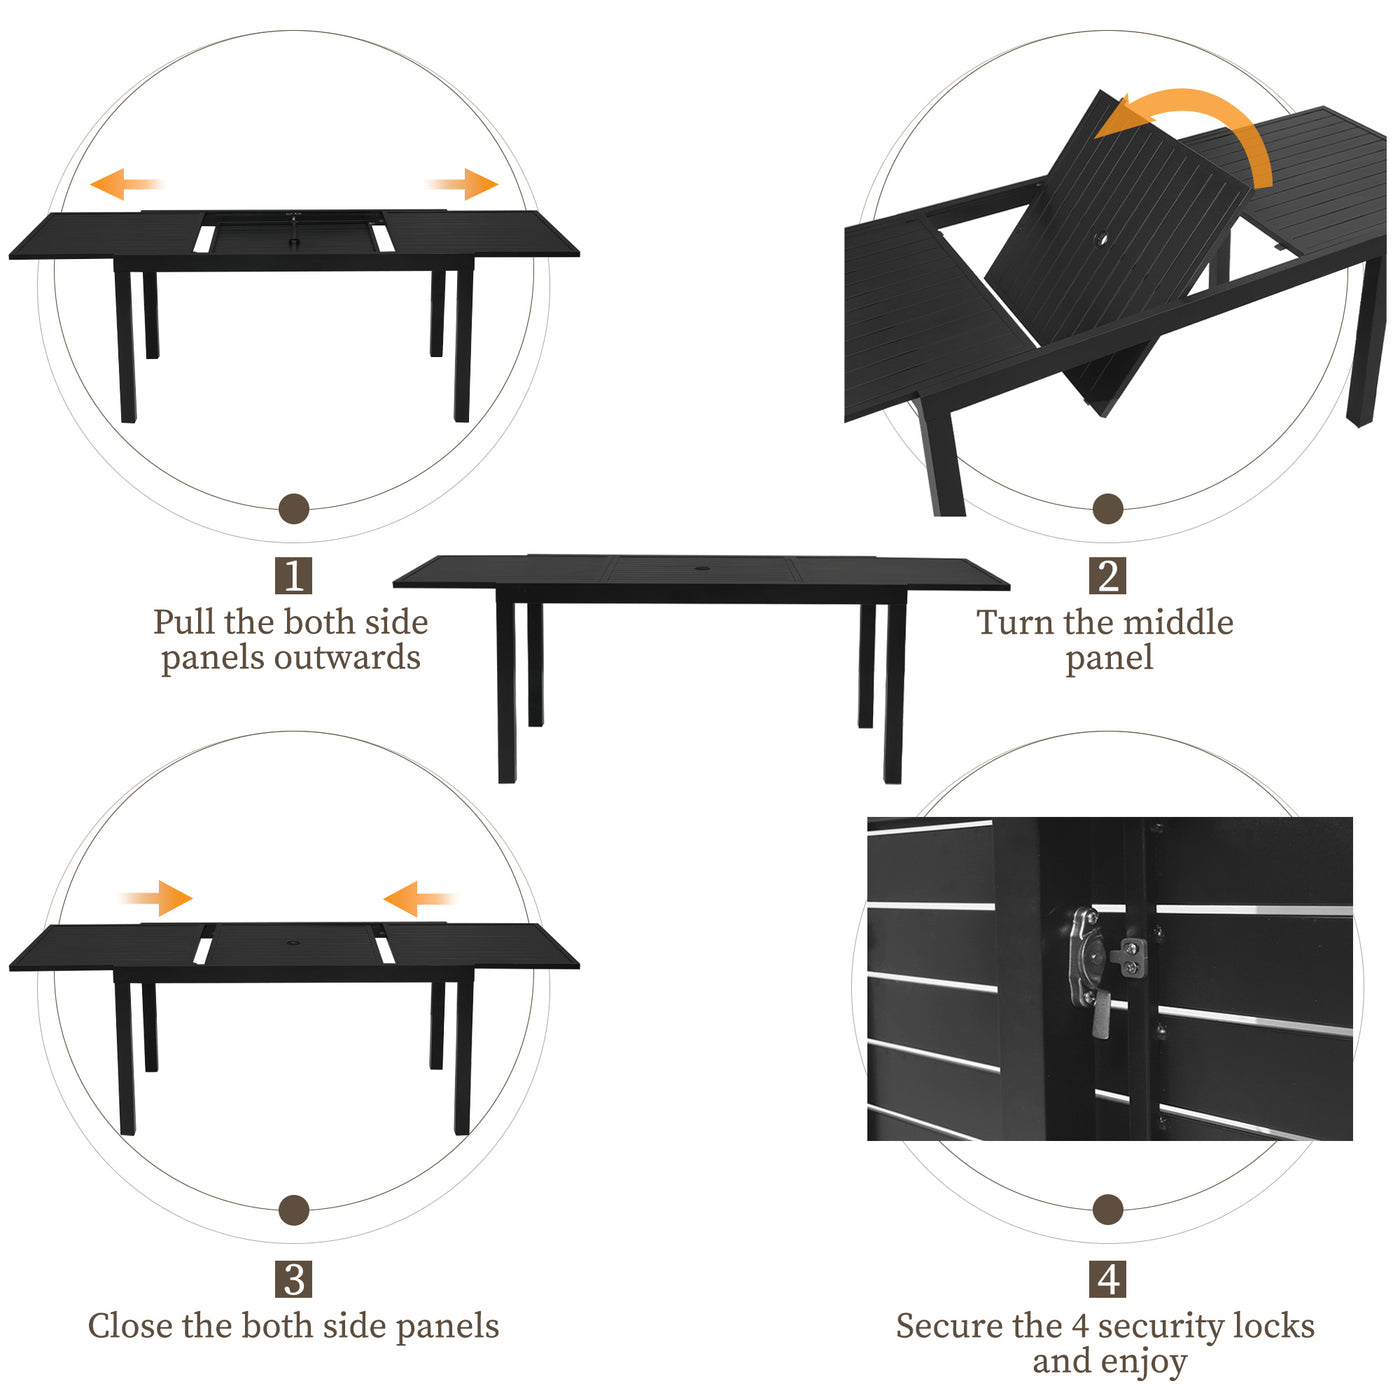 An instructional diagram showing the four-step process of expanding, rotating, closing, and securing a Pizzello Aluminum Patio Extendable Dining Table.